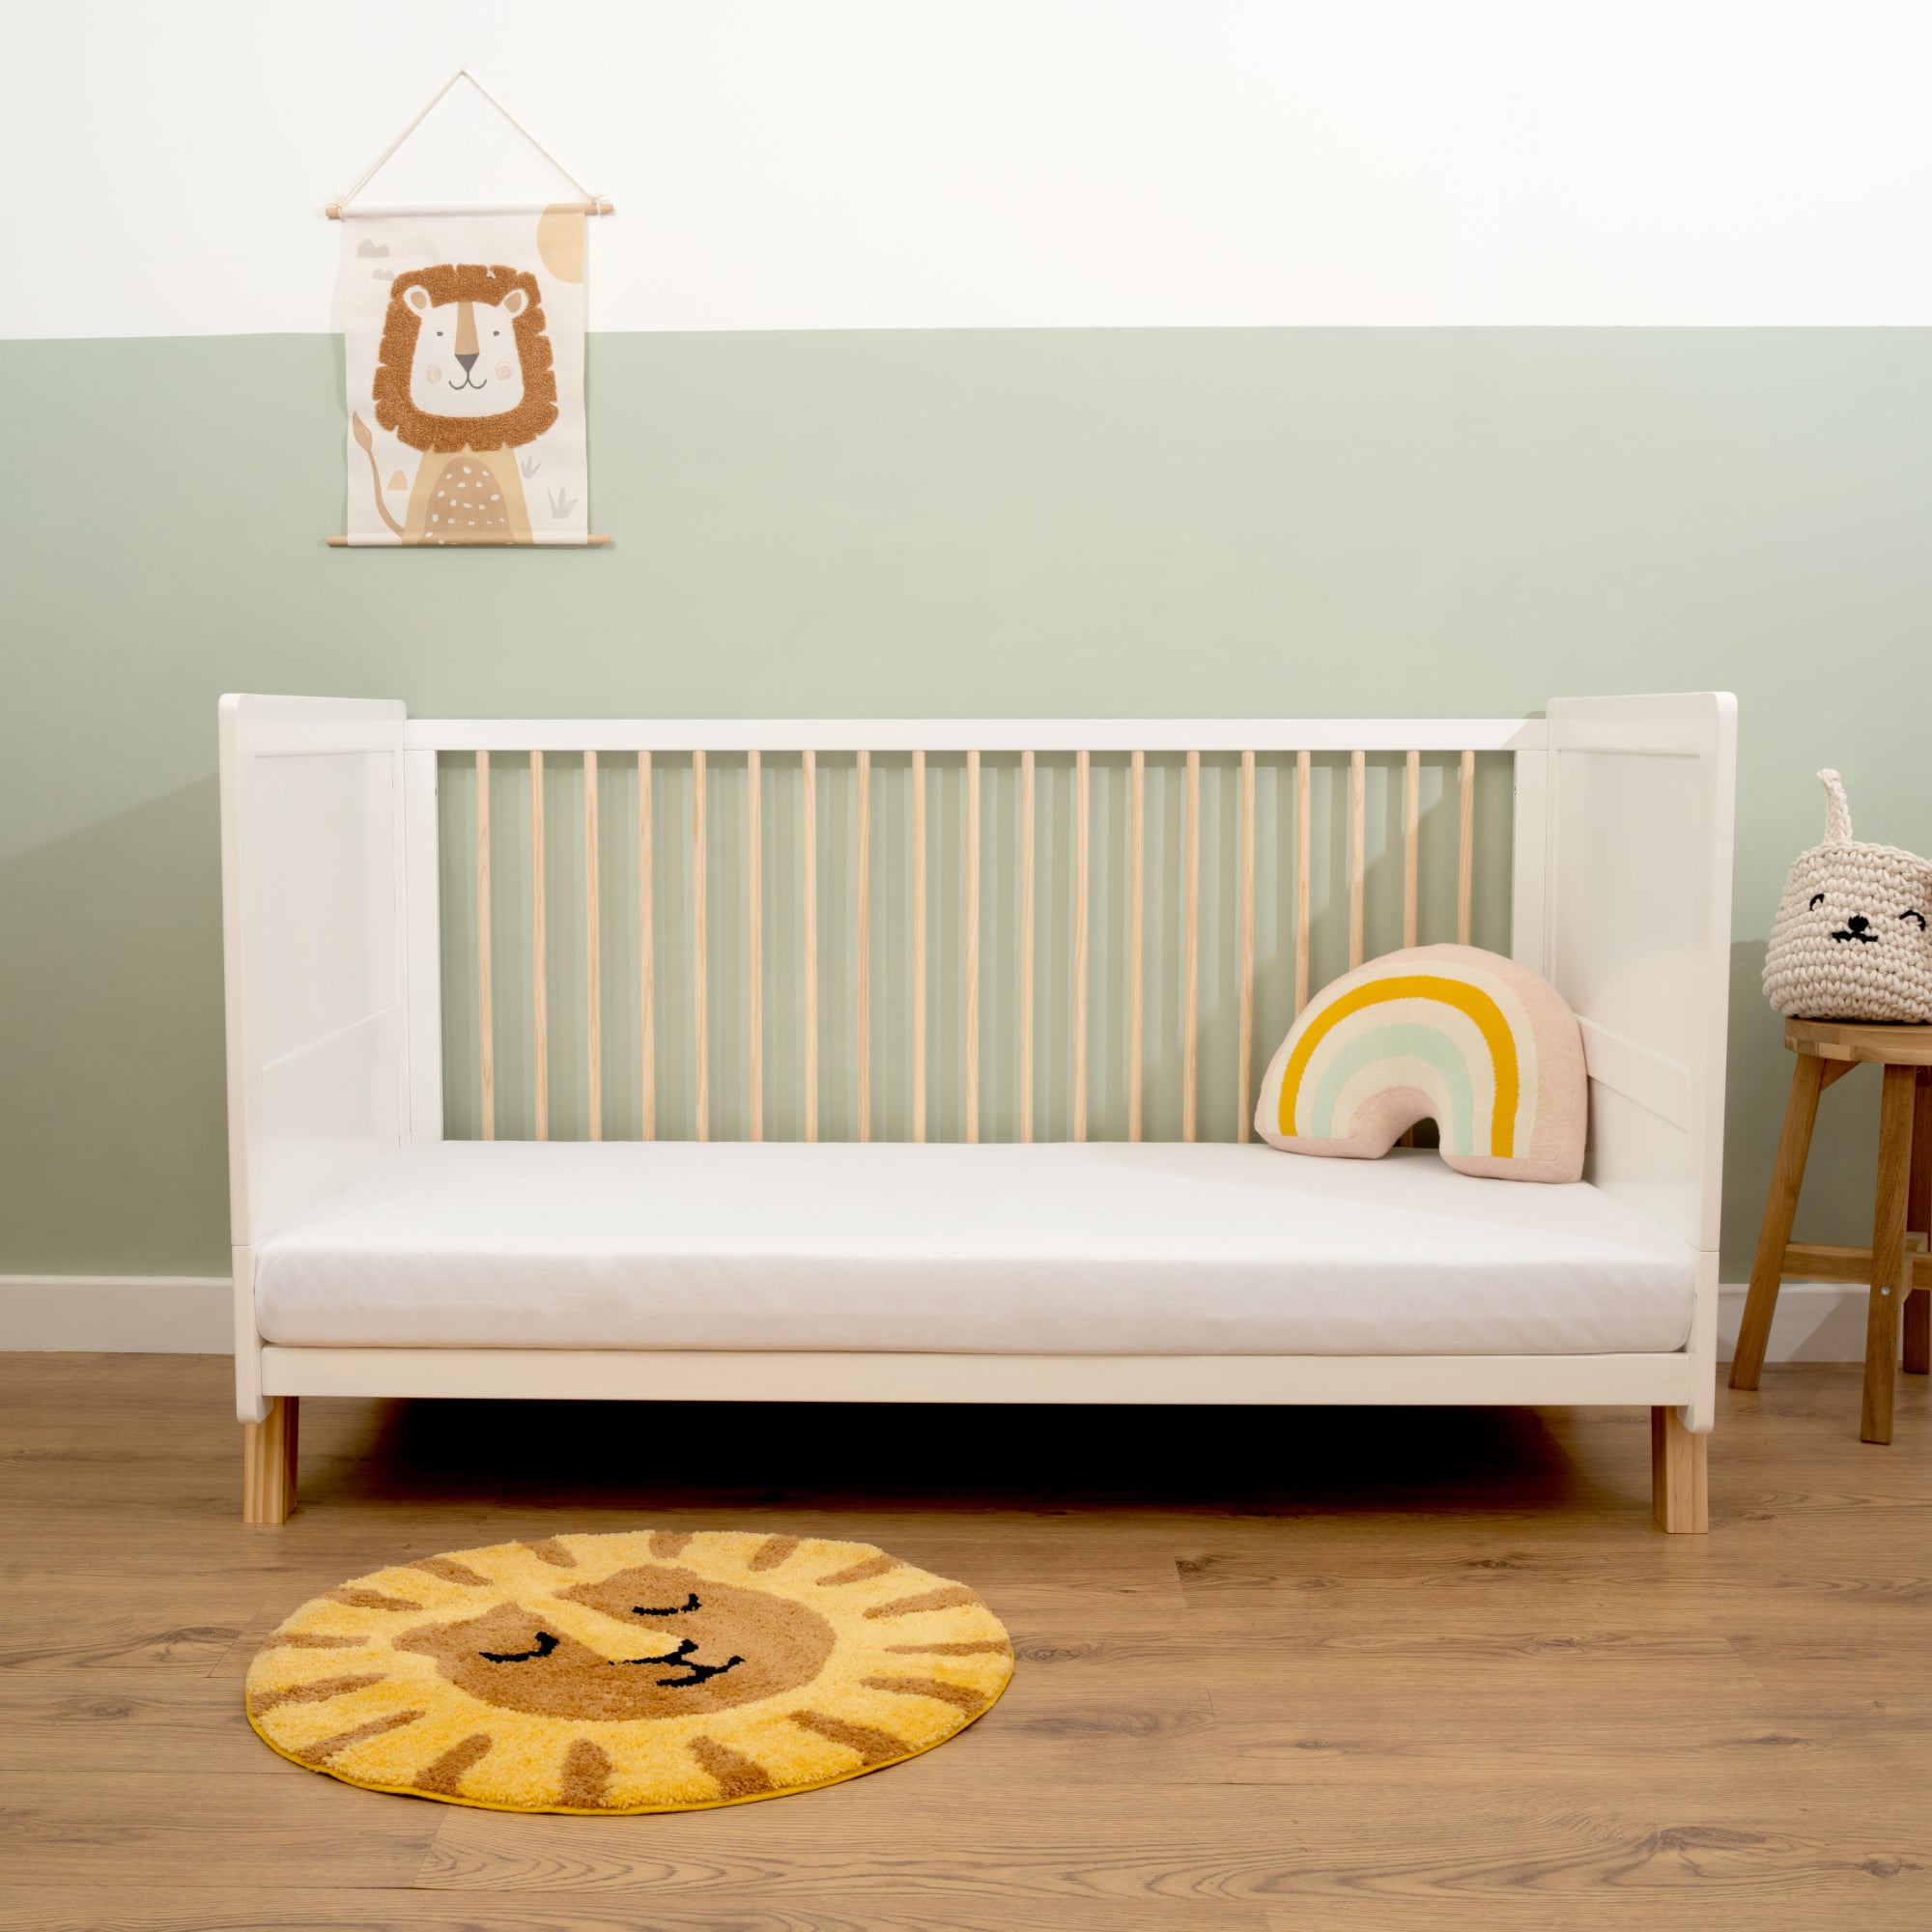 Essentials White Cot Bed with a baby rainbow cushion and cot mattress in sage green nursery | Nursery Furniture - Clair de Lune UK